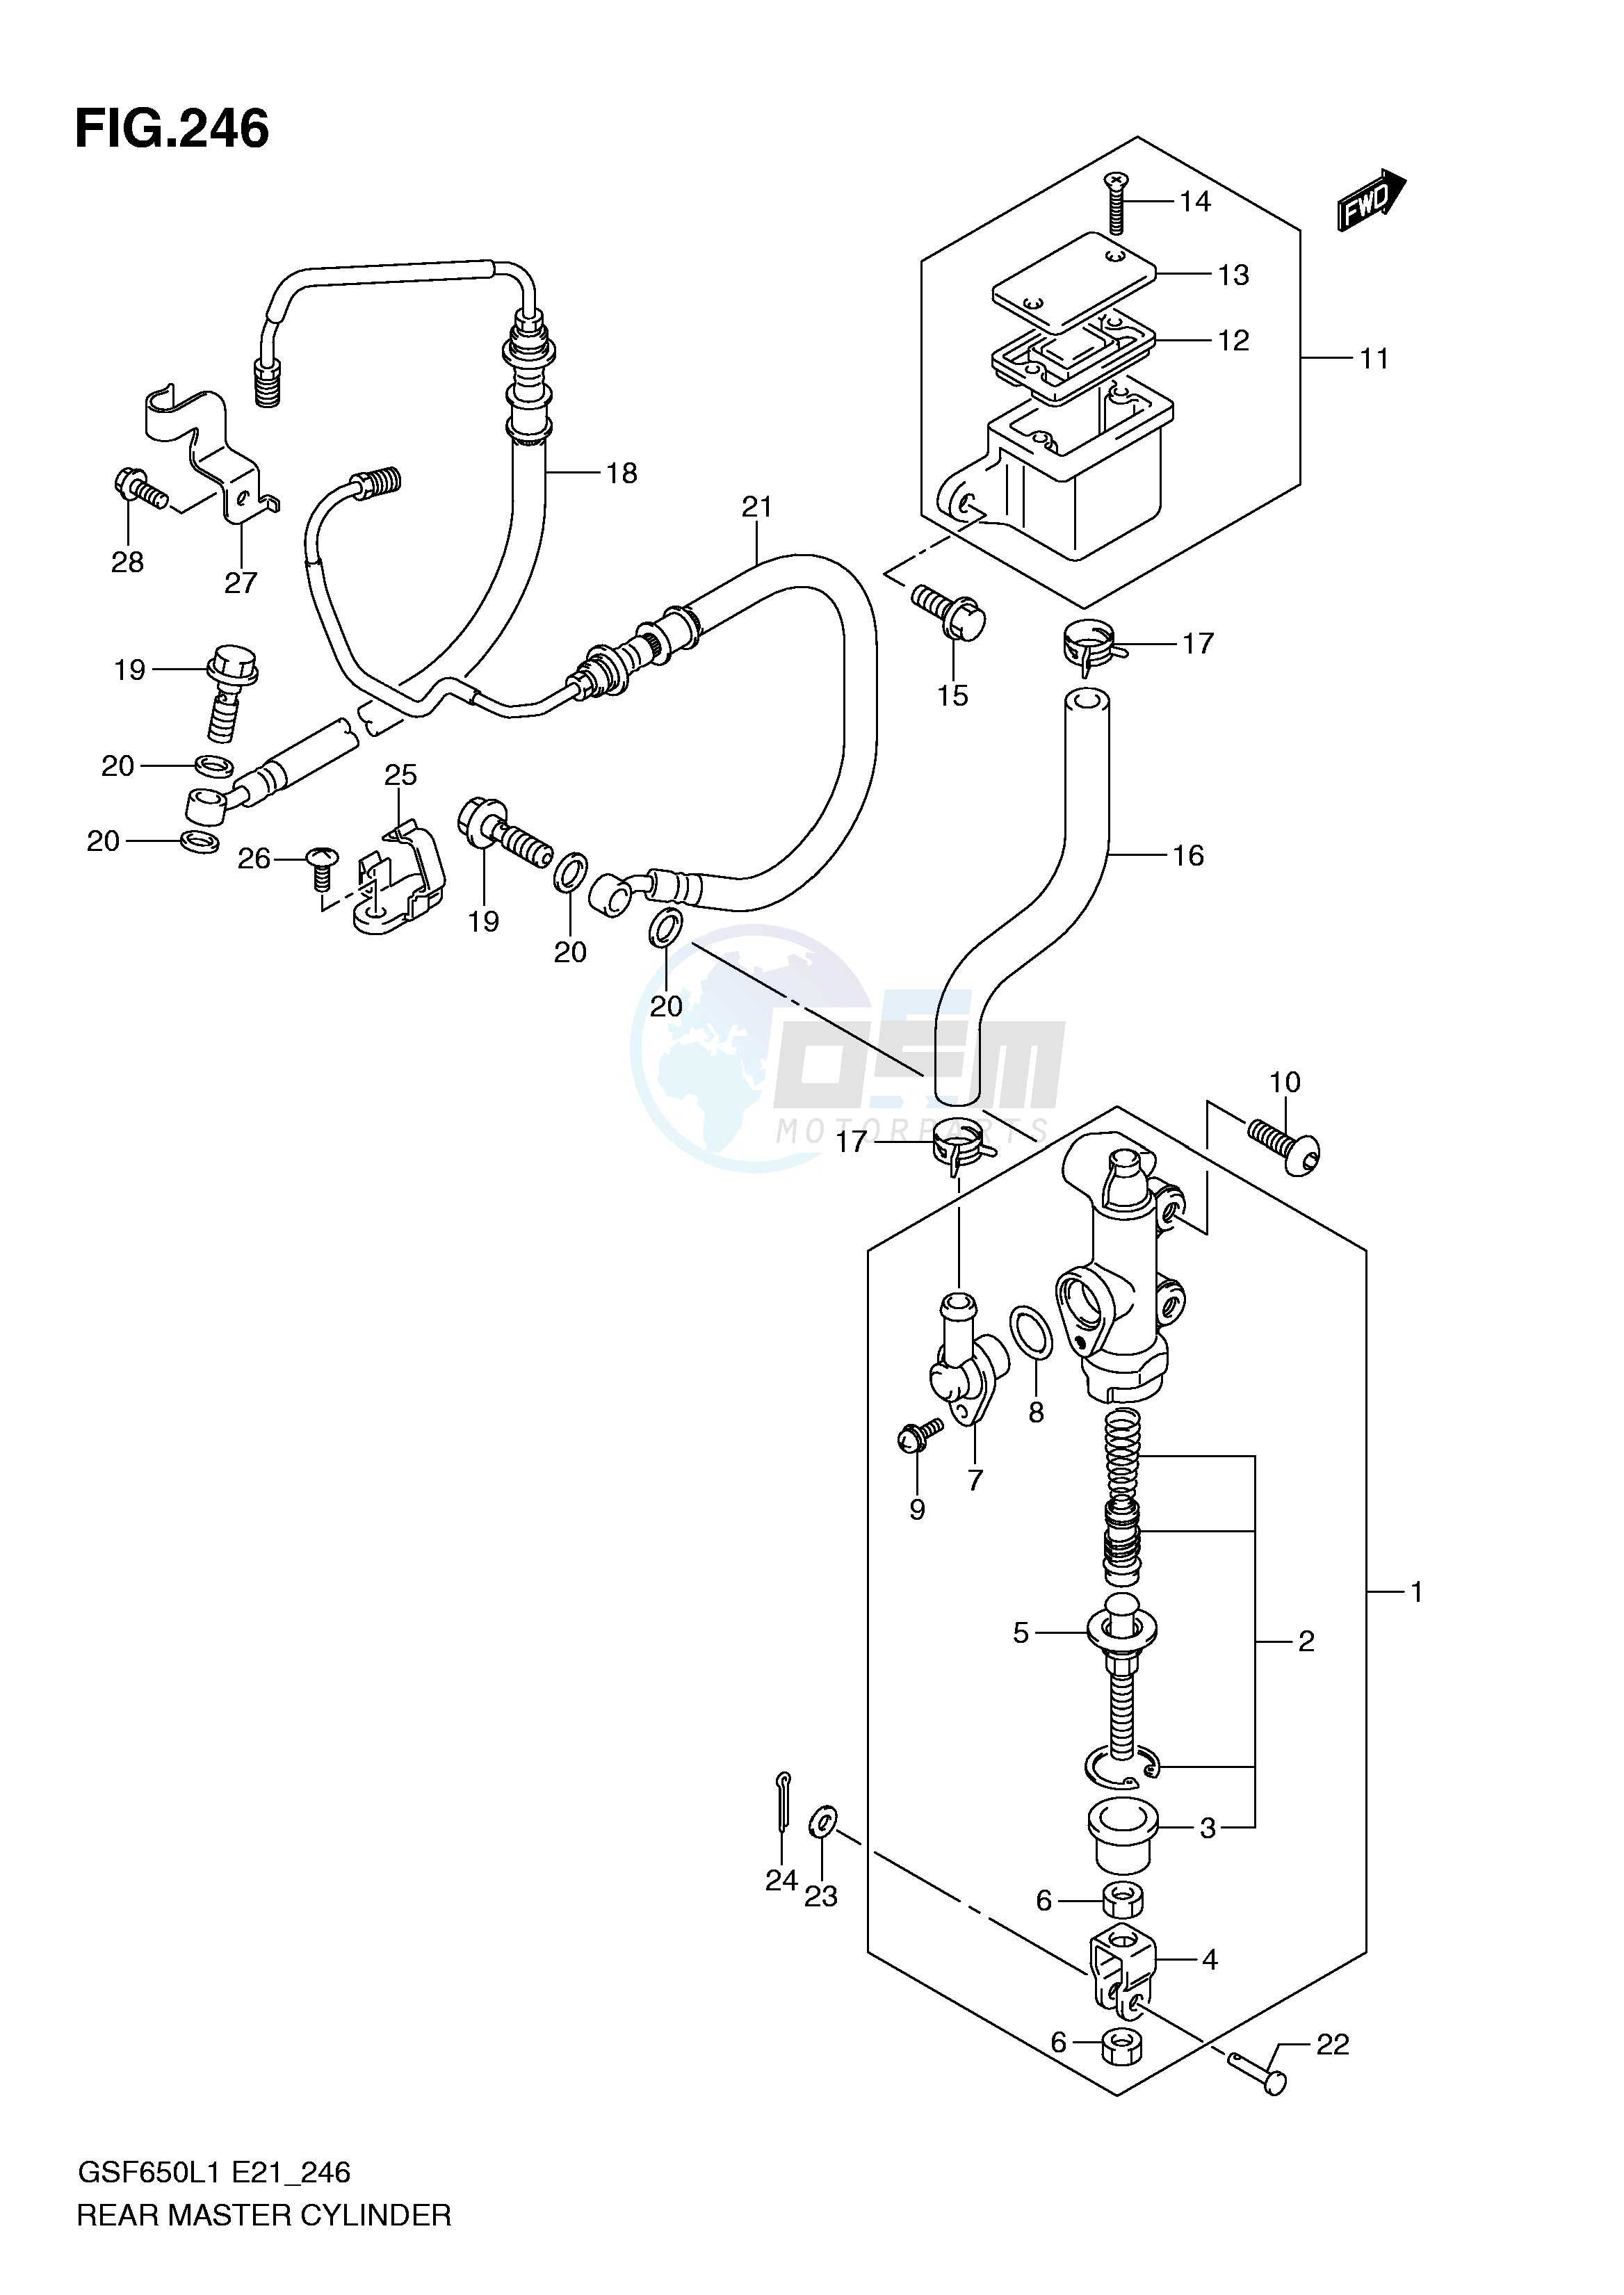 REAR MASTER CYLINDER (GSF650SUAL1 E21) image